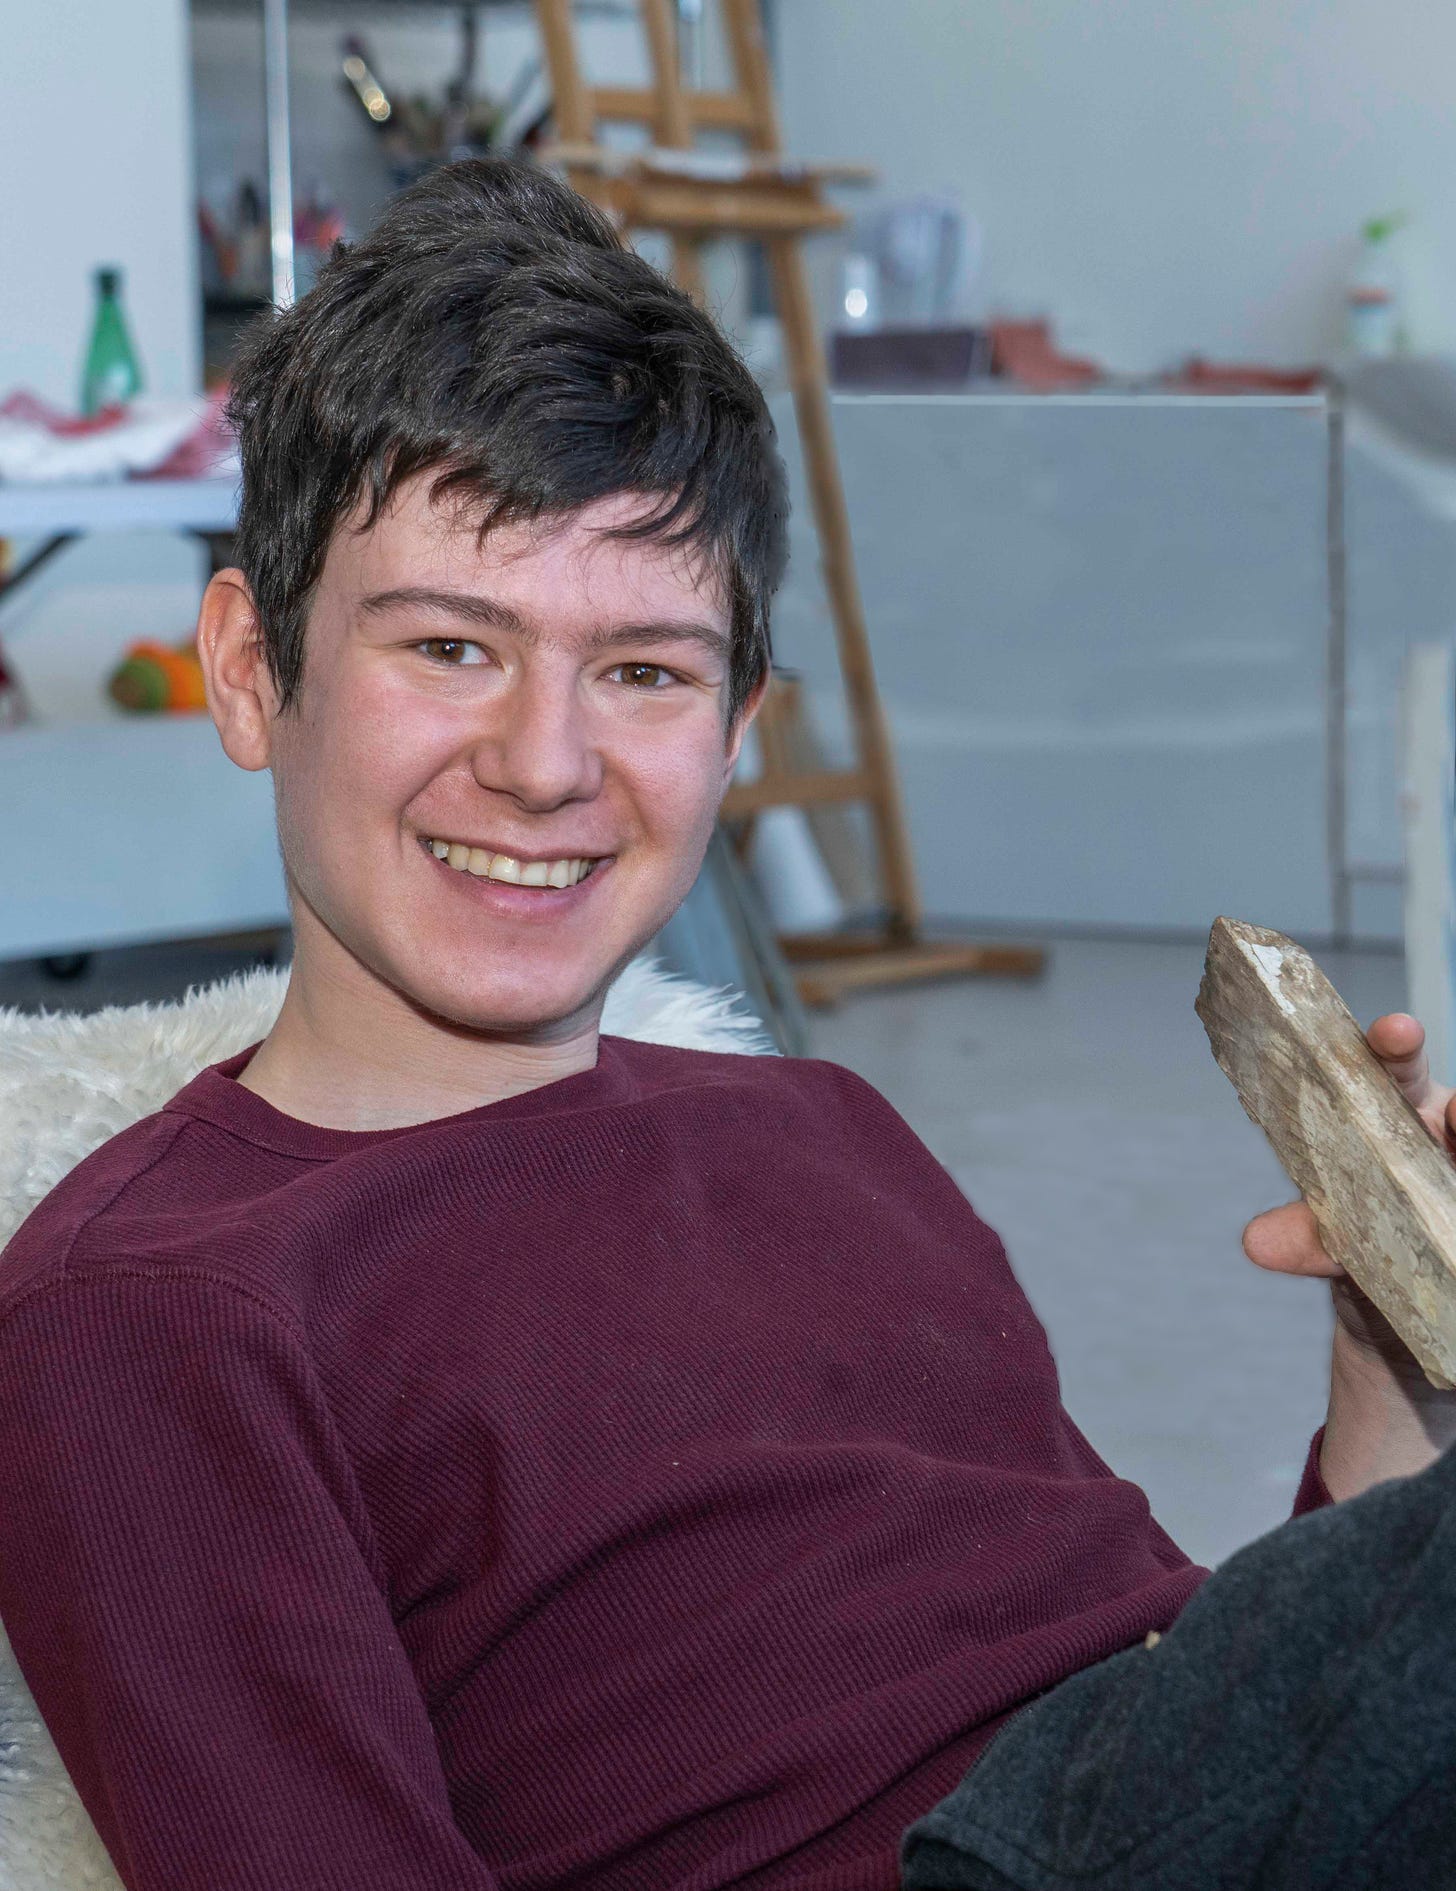 A headshot of Adam Wolfond. He has short brown hair and is wearing a maroon shirt. He is sitting and smiling. Photo credit: Michael Klar.